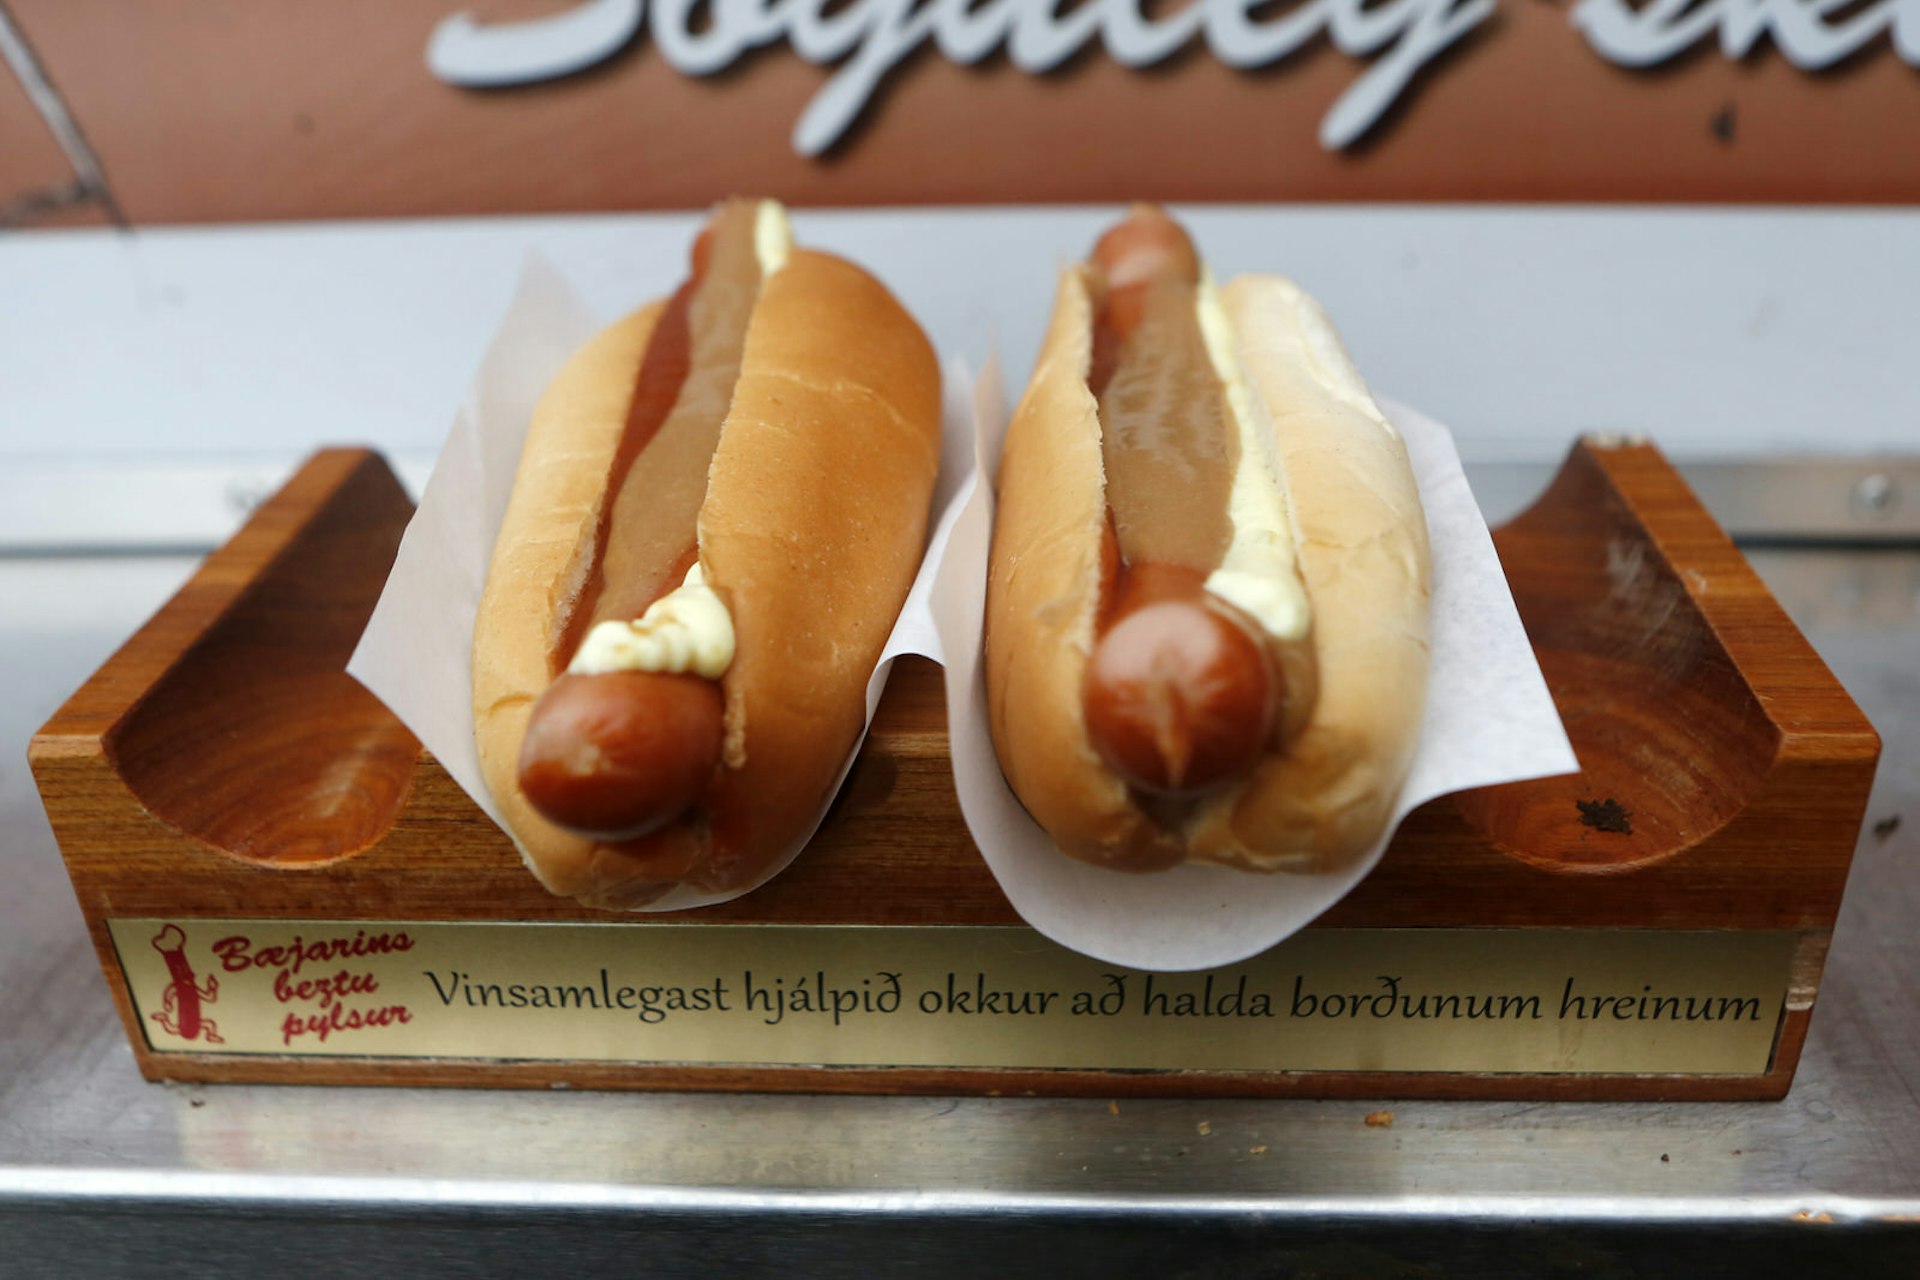 Hot dogs are the snack of choice for Reykjavík locals